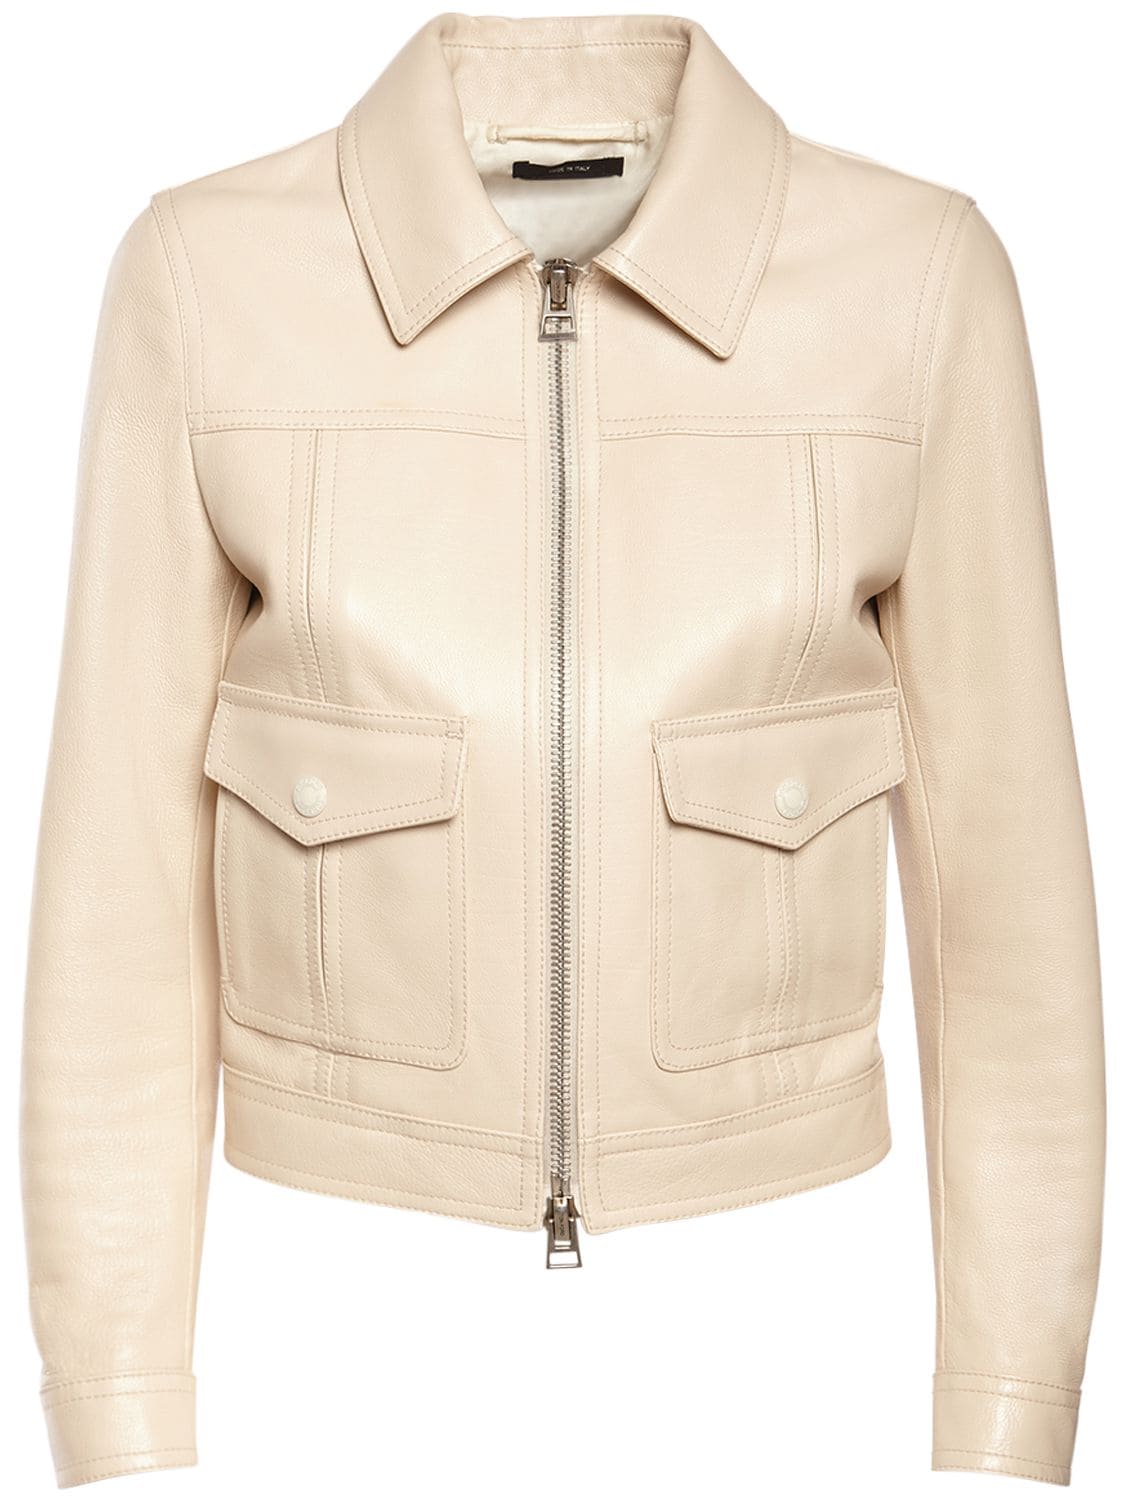 Tom Ford Leather Biker Jacket W/shirt Collar In Ivory